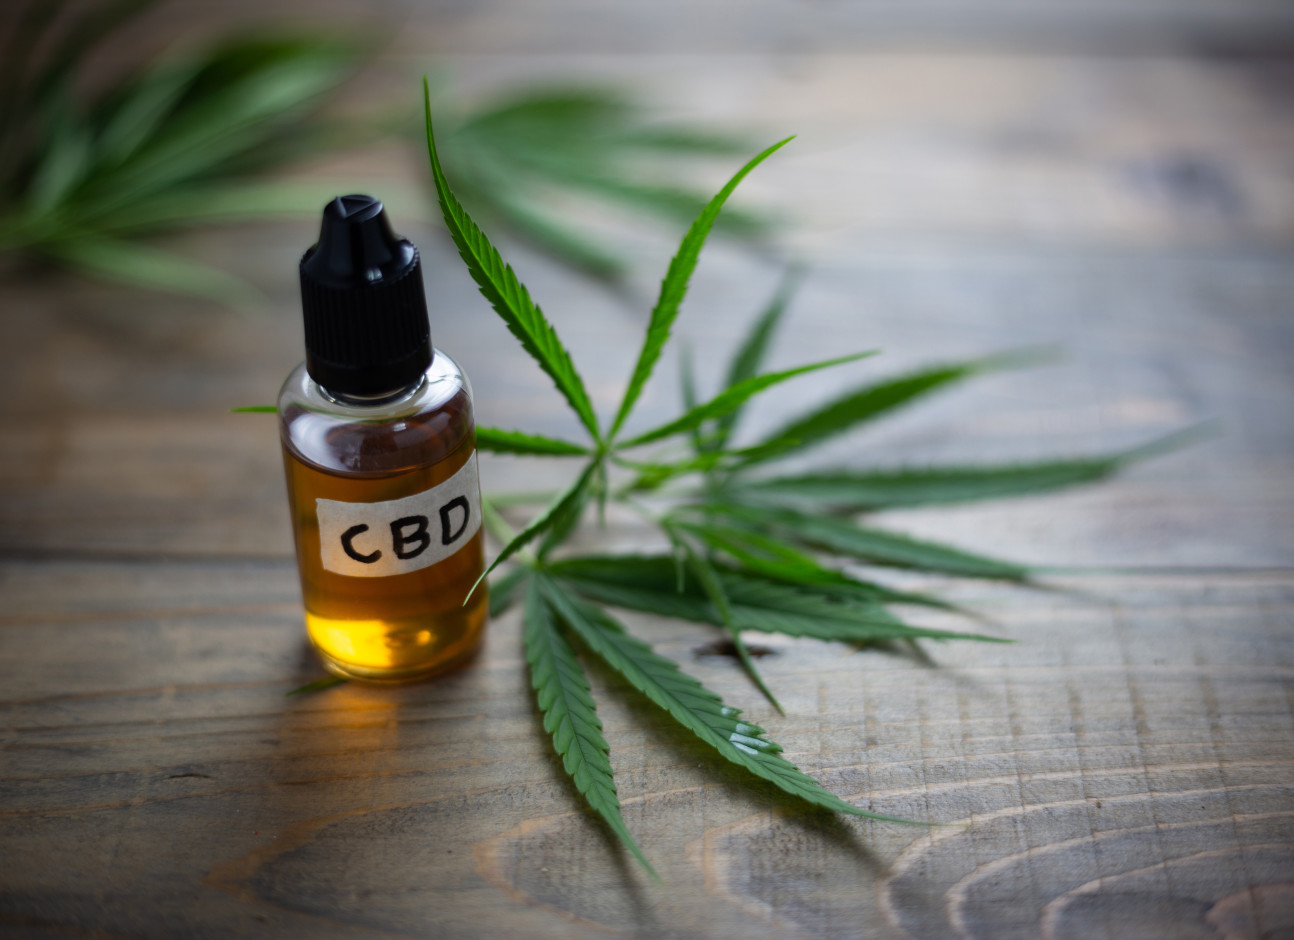 Small jar of oil marked 'CBD' next to cannabis leaf